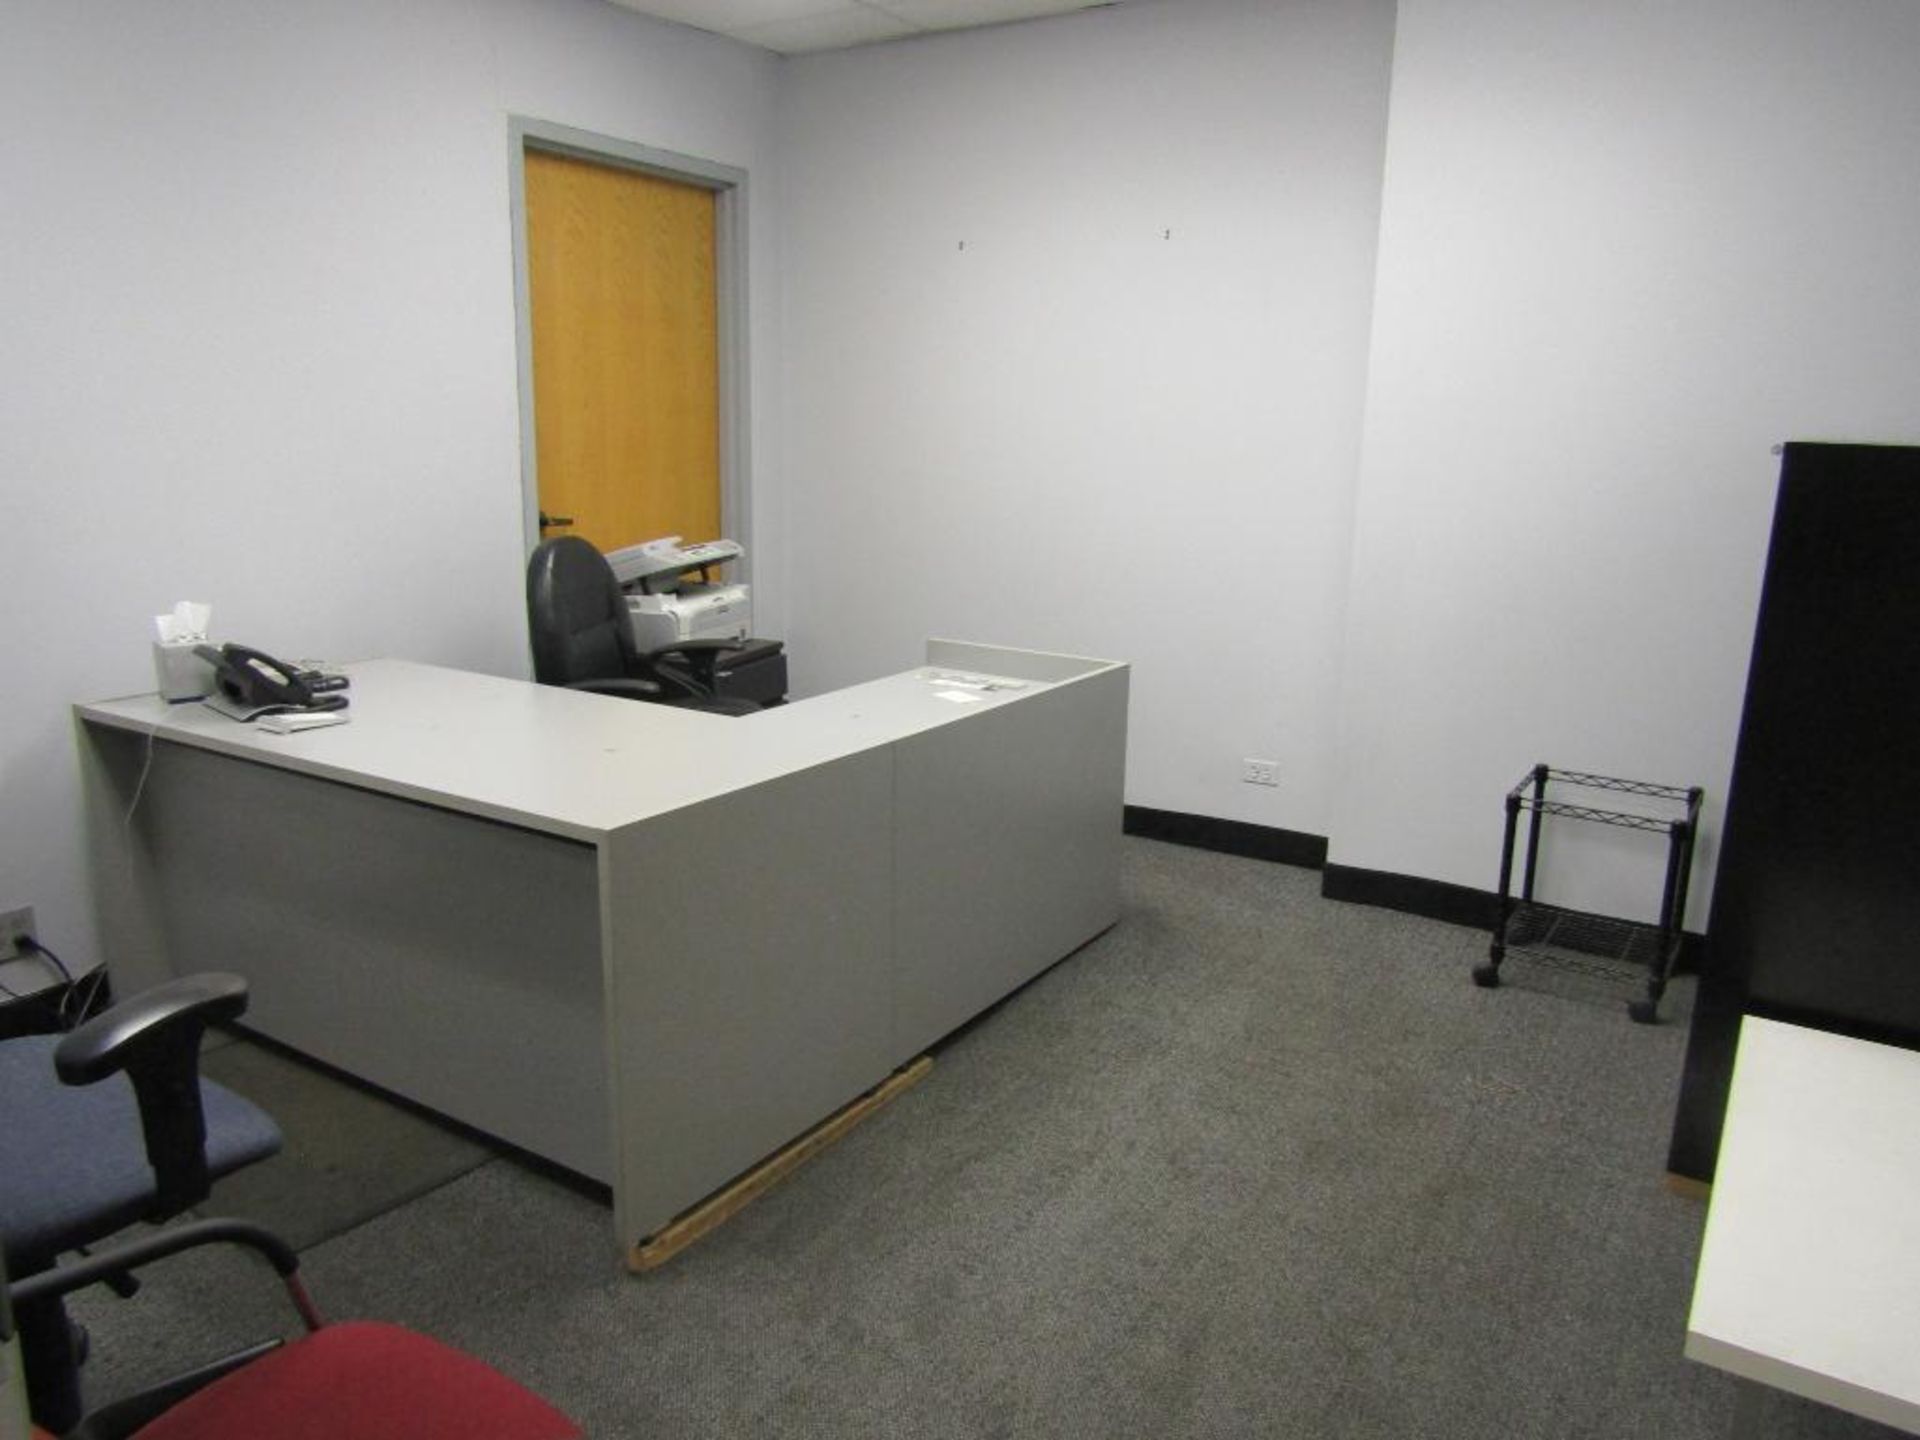 Office Desk, Chair, File Cabinets